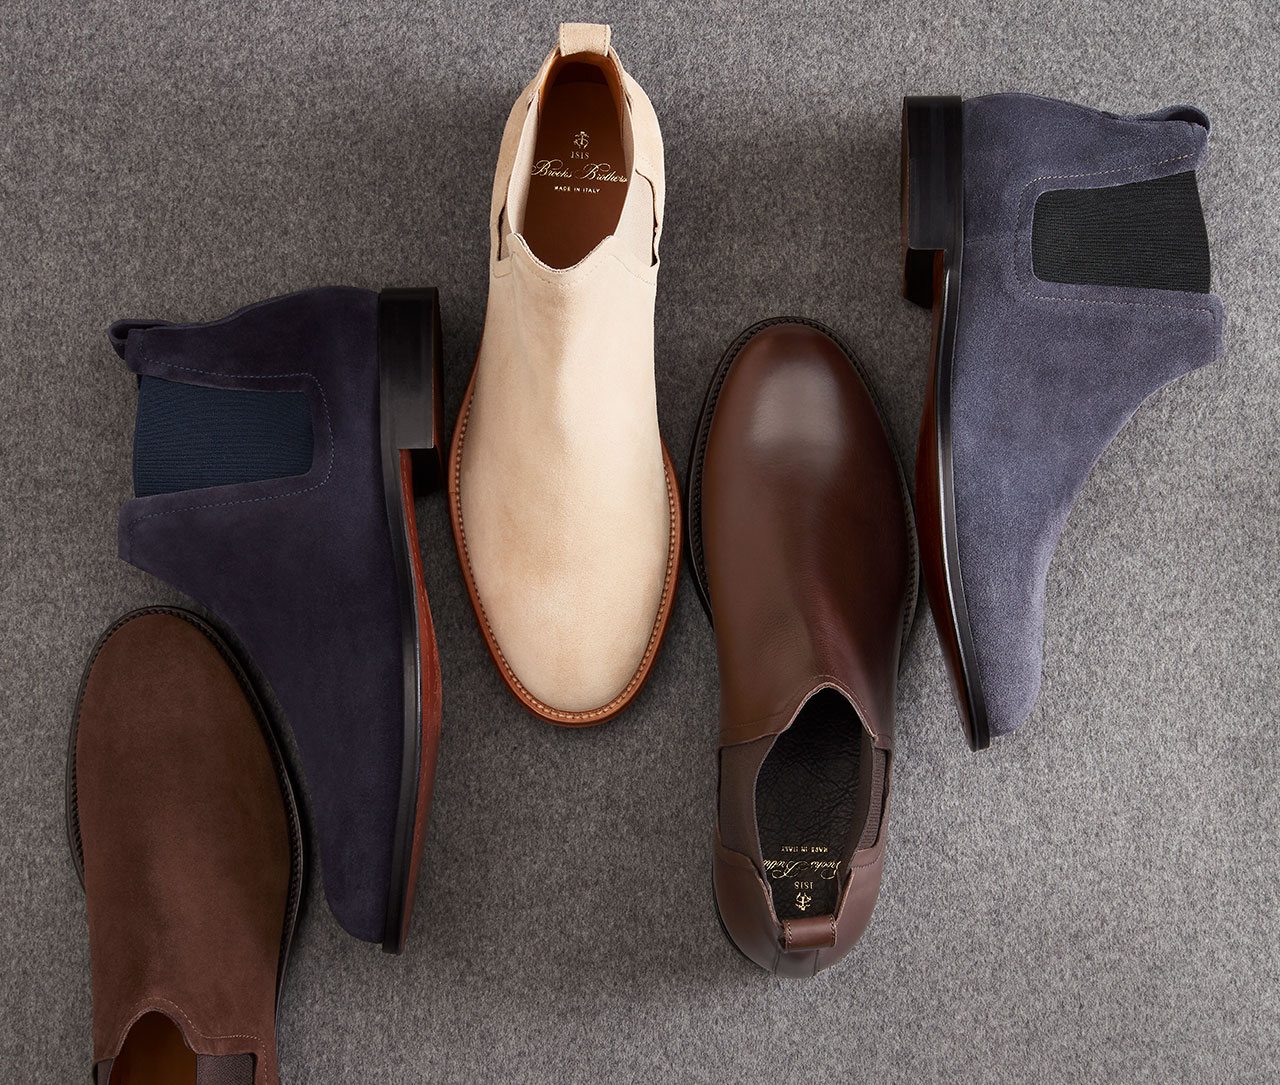 Put your best foot forward in our classic Chelsea boots. This wardrobe-staple style is defined by a sleek, smooth silhouette and elasticized side gores for easy on-and-off.